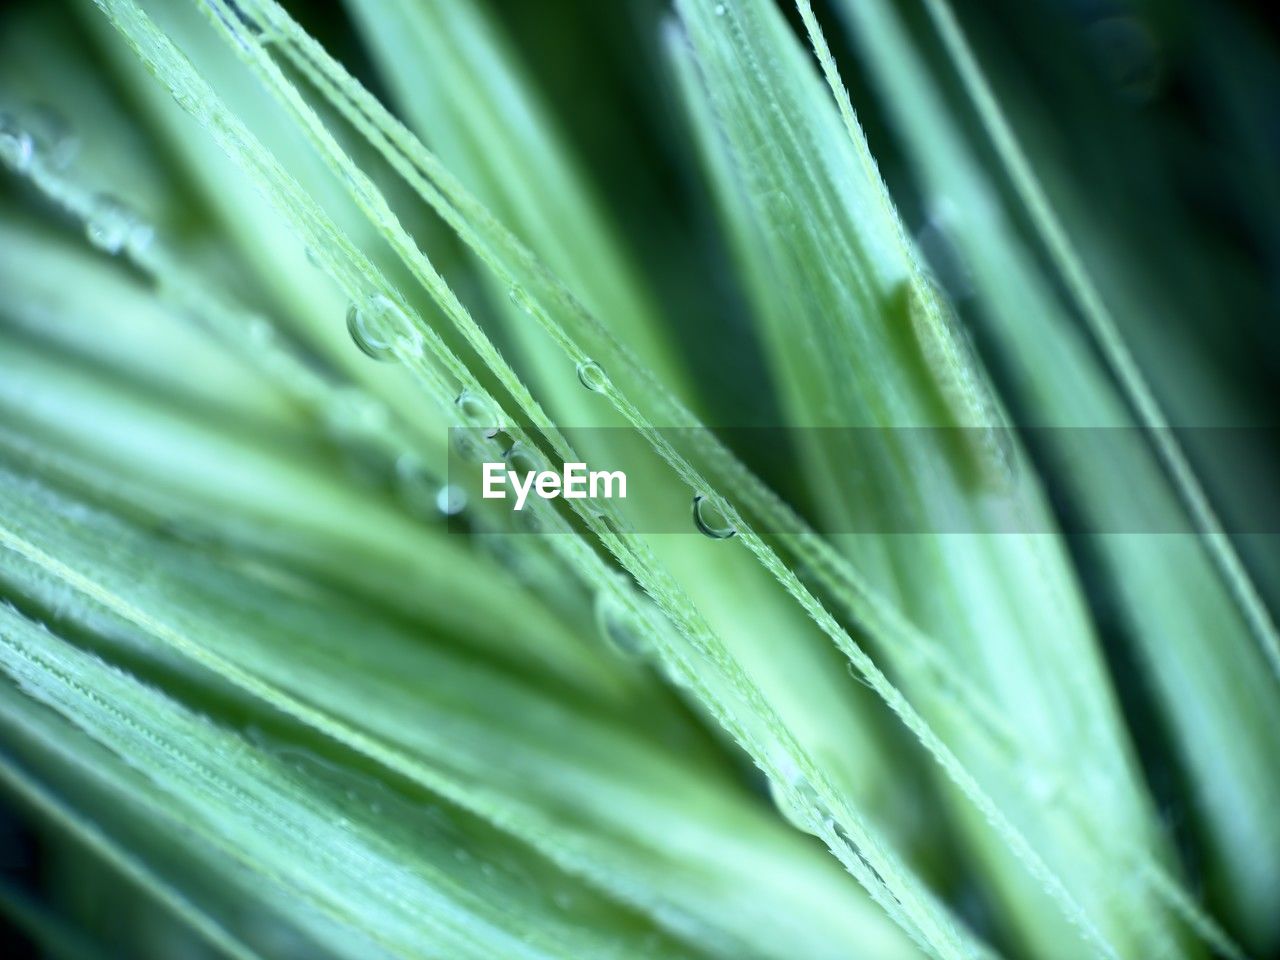 green, close-up, plant, leaf, macro photography, no people, plant part, nature, growth, water, freshness, wet, grass, backgrounds, selective focus, drop, beauty in nature, palm tree, plant stem, palm leaf, flower, full frame, extreme close-up, outdoors, food and drink